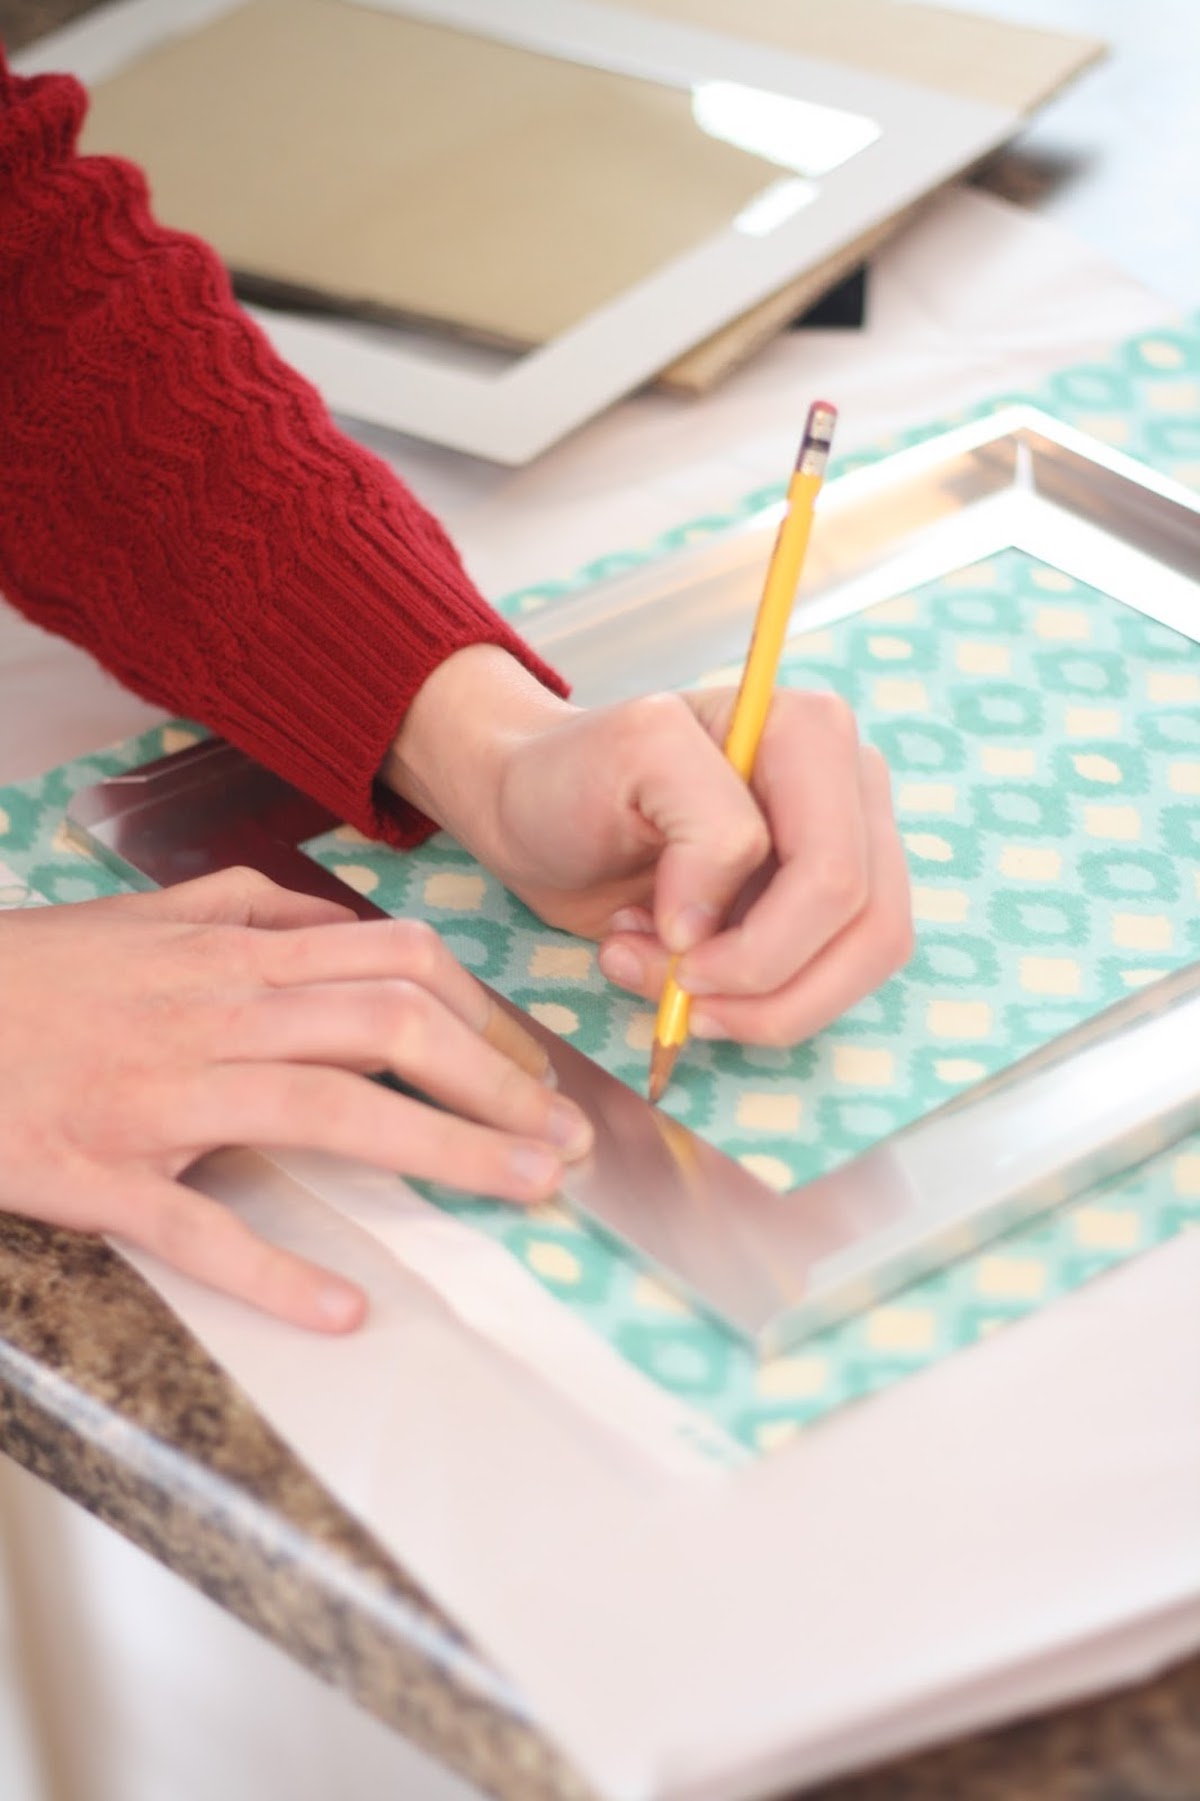 Trace the frame on fabric with a pencil